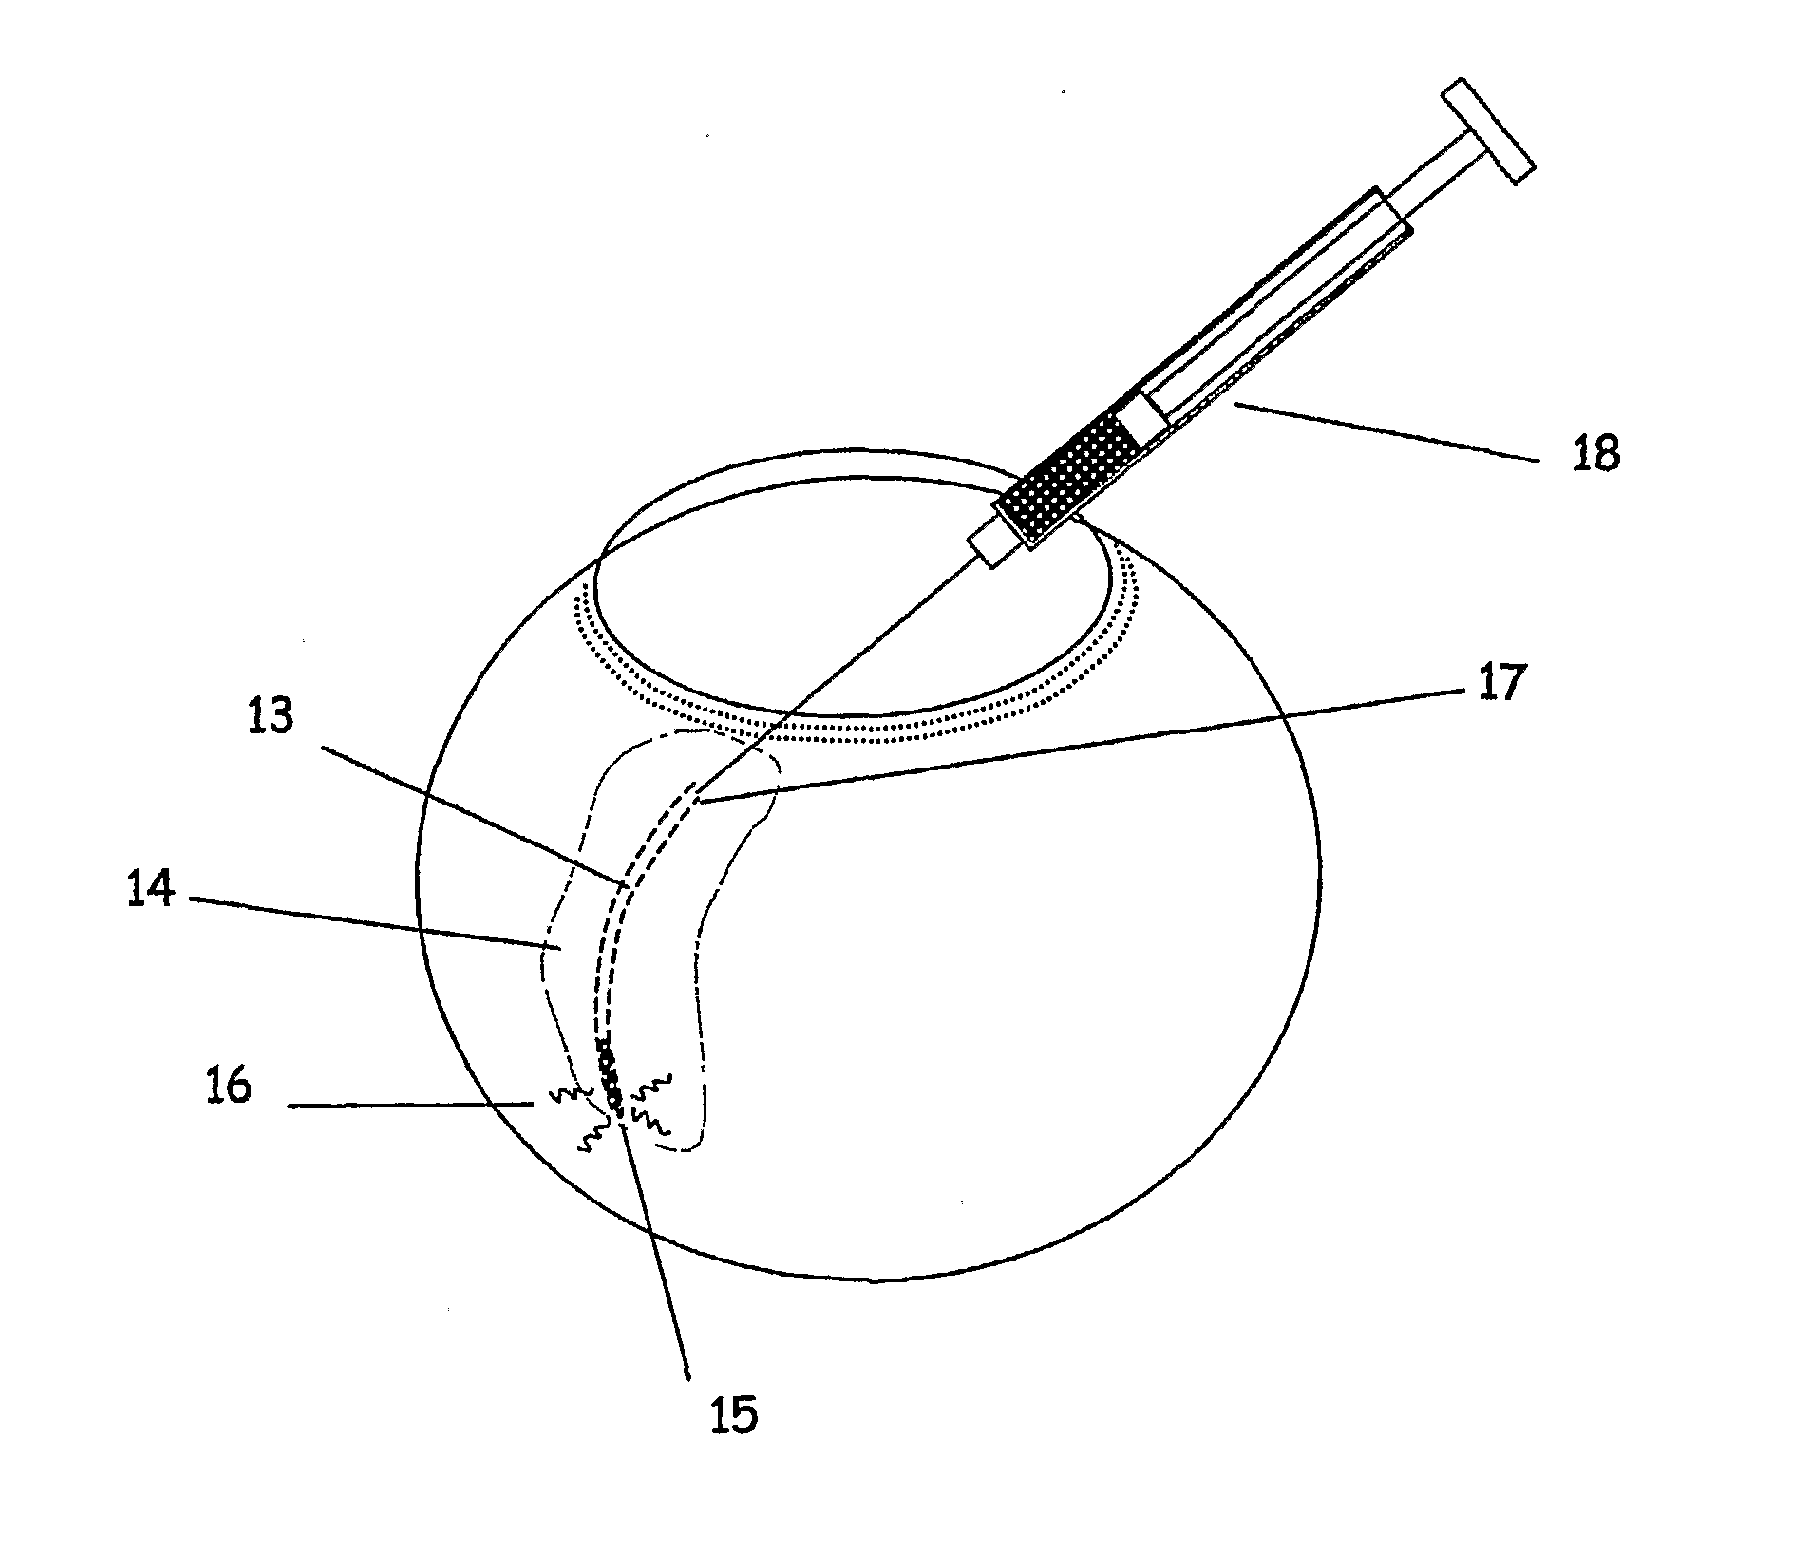 Apparatus and Method for Ocular Treatment